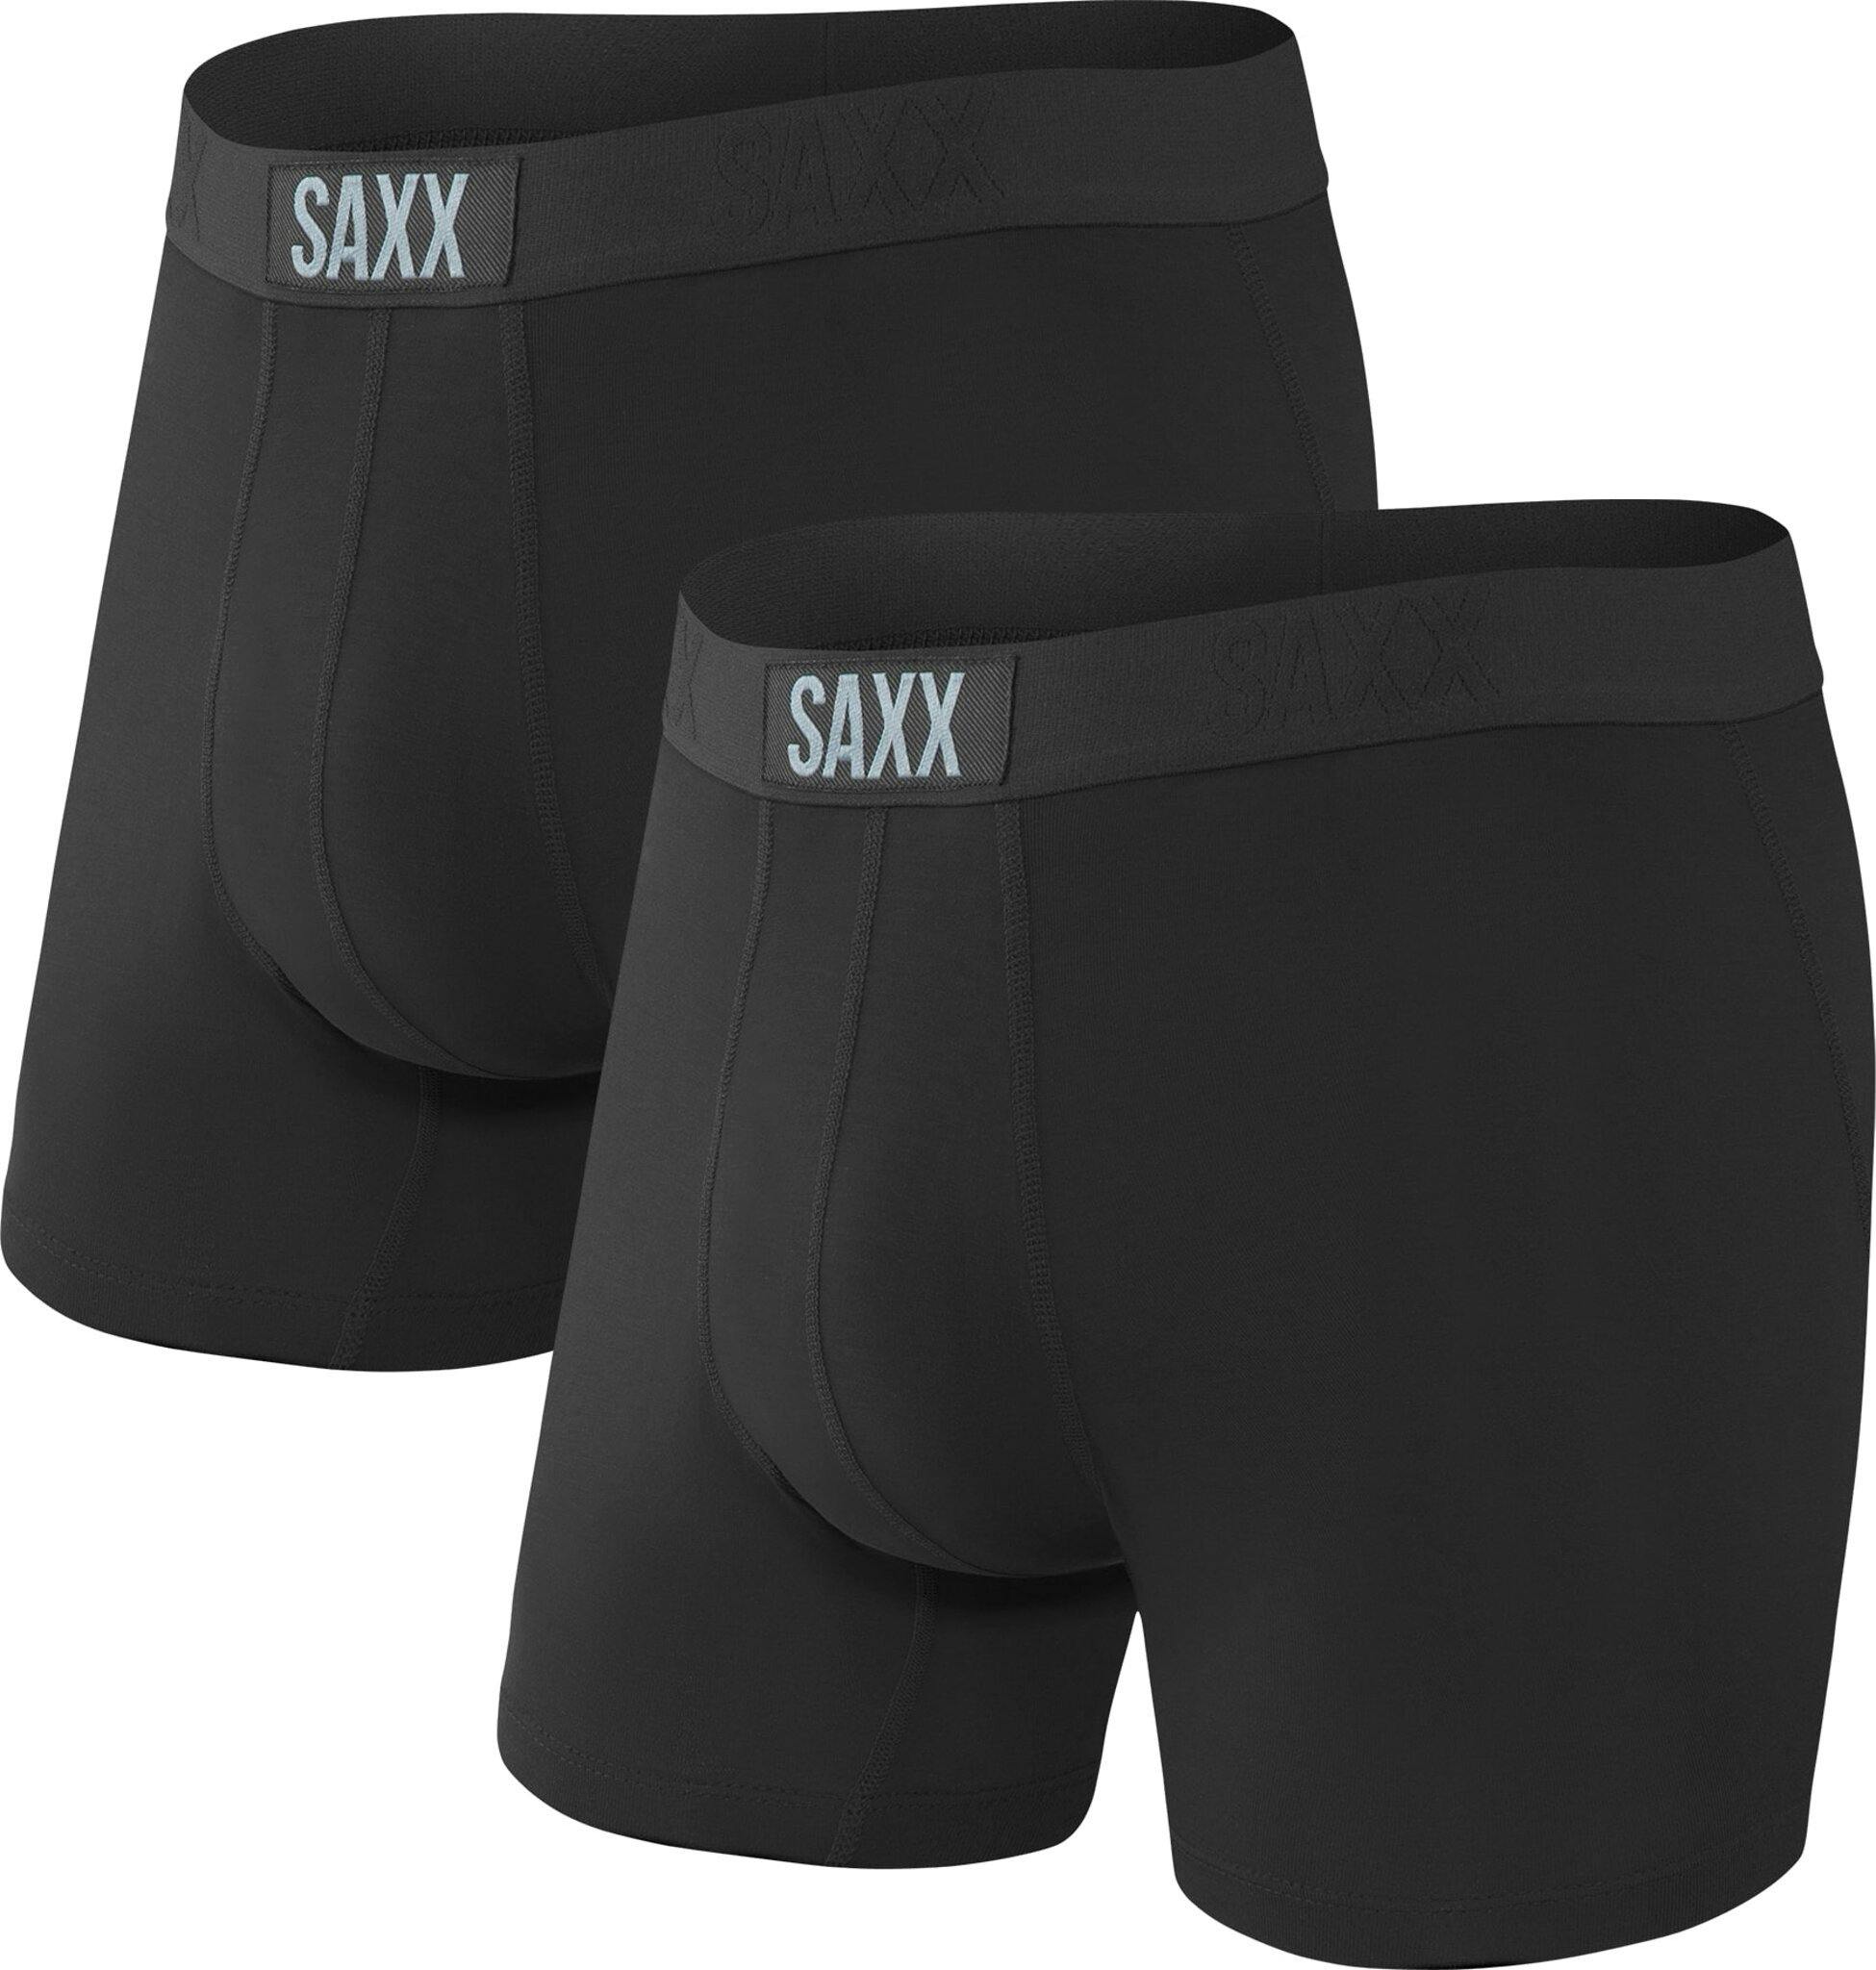 Product image for Vibe Boxer 2 Pack - Men's